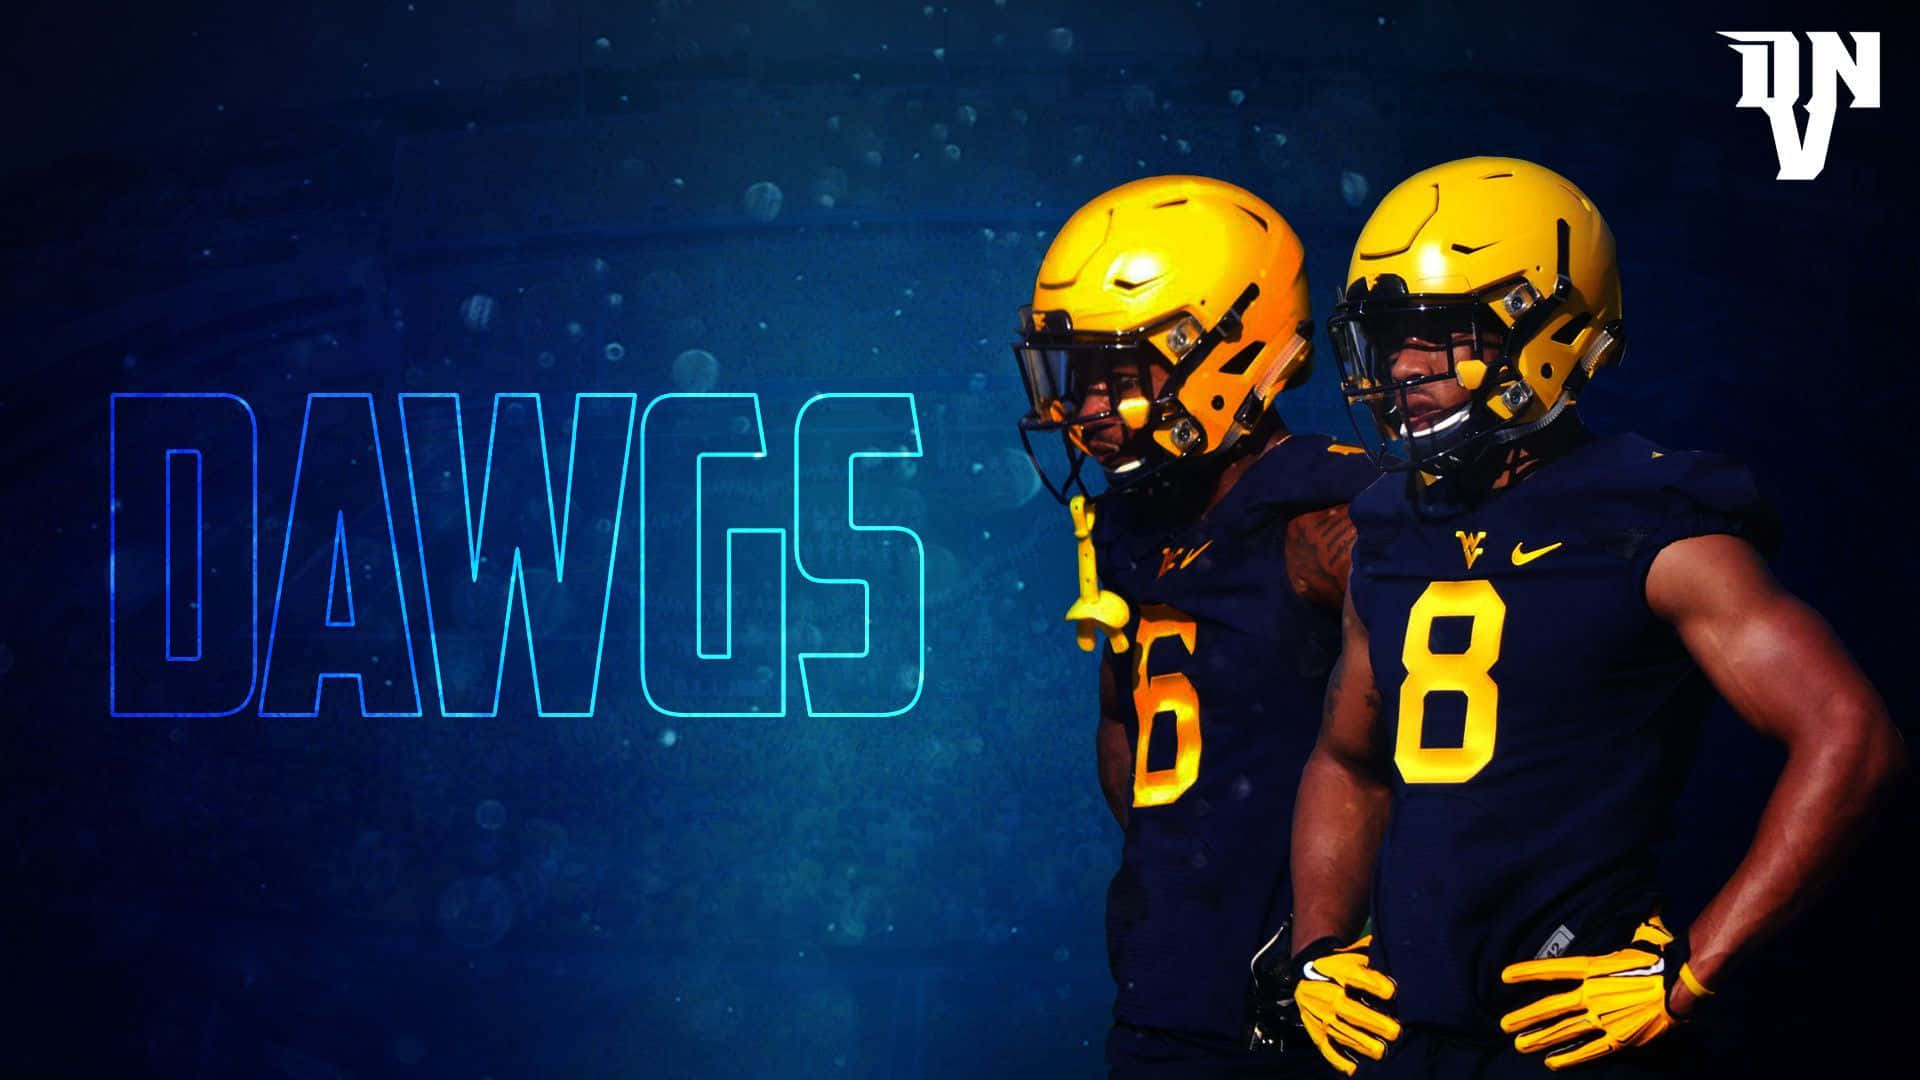 Join The Student Section And Cheer On West Virginia Football!